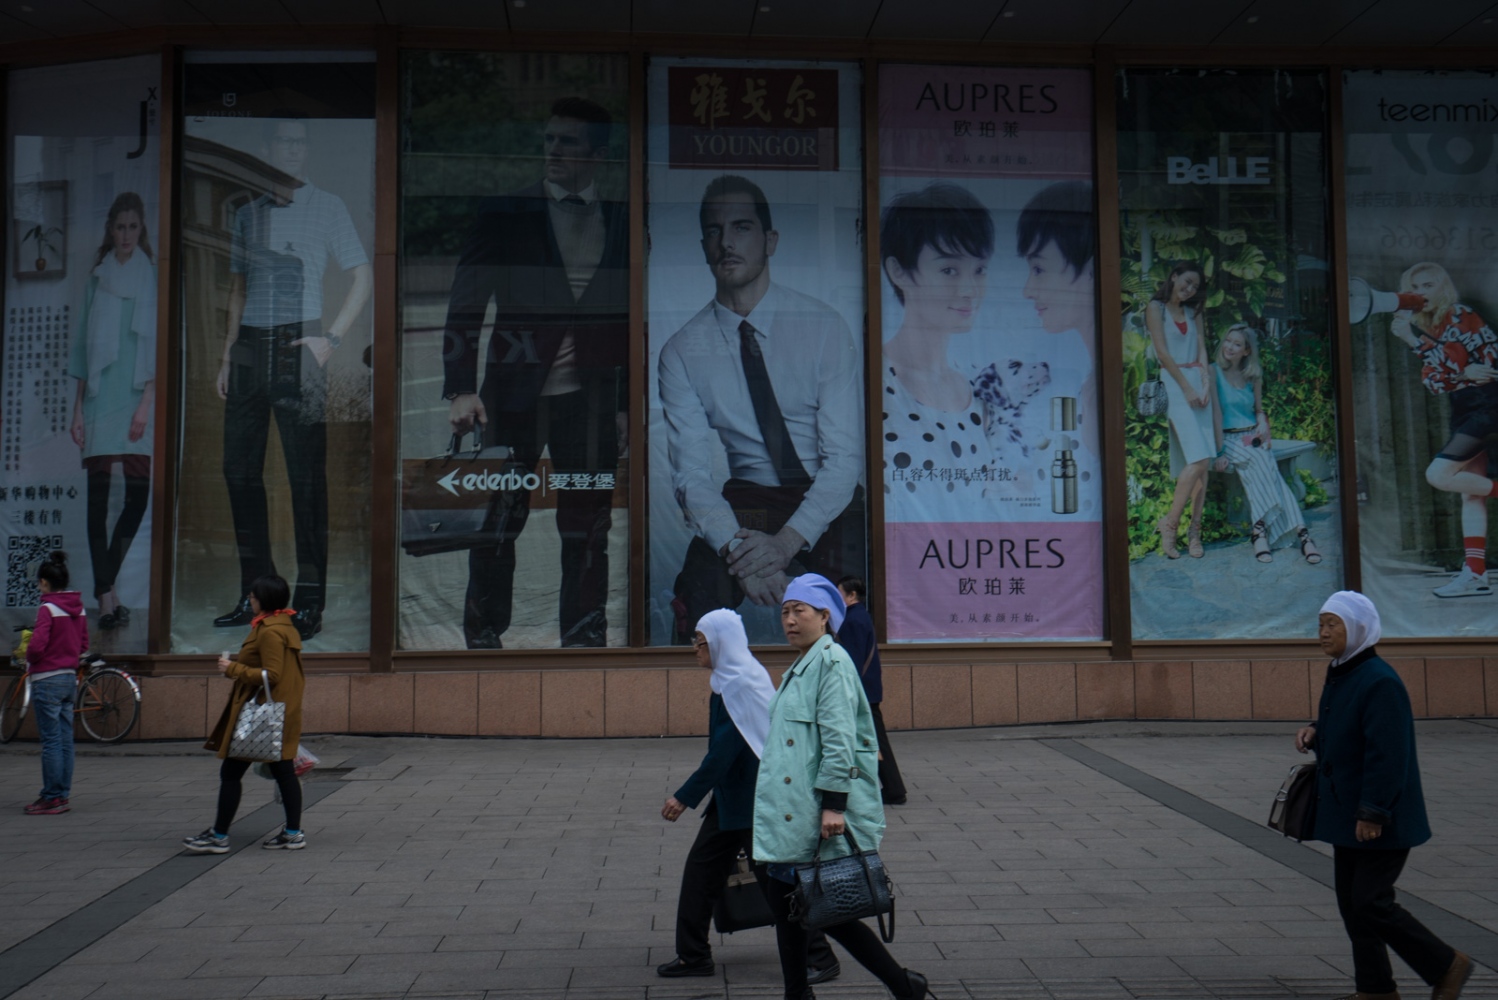 If China Builds It, Will the Arab World Come? -                 A pedestrian street in front of a...